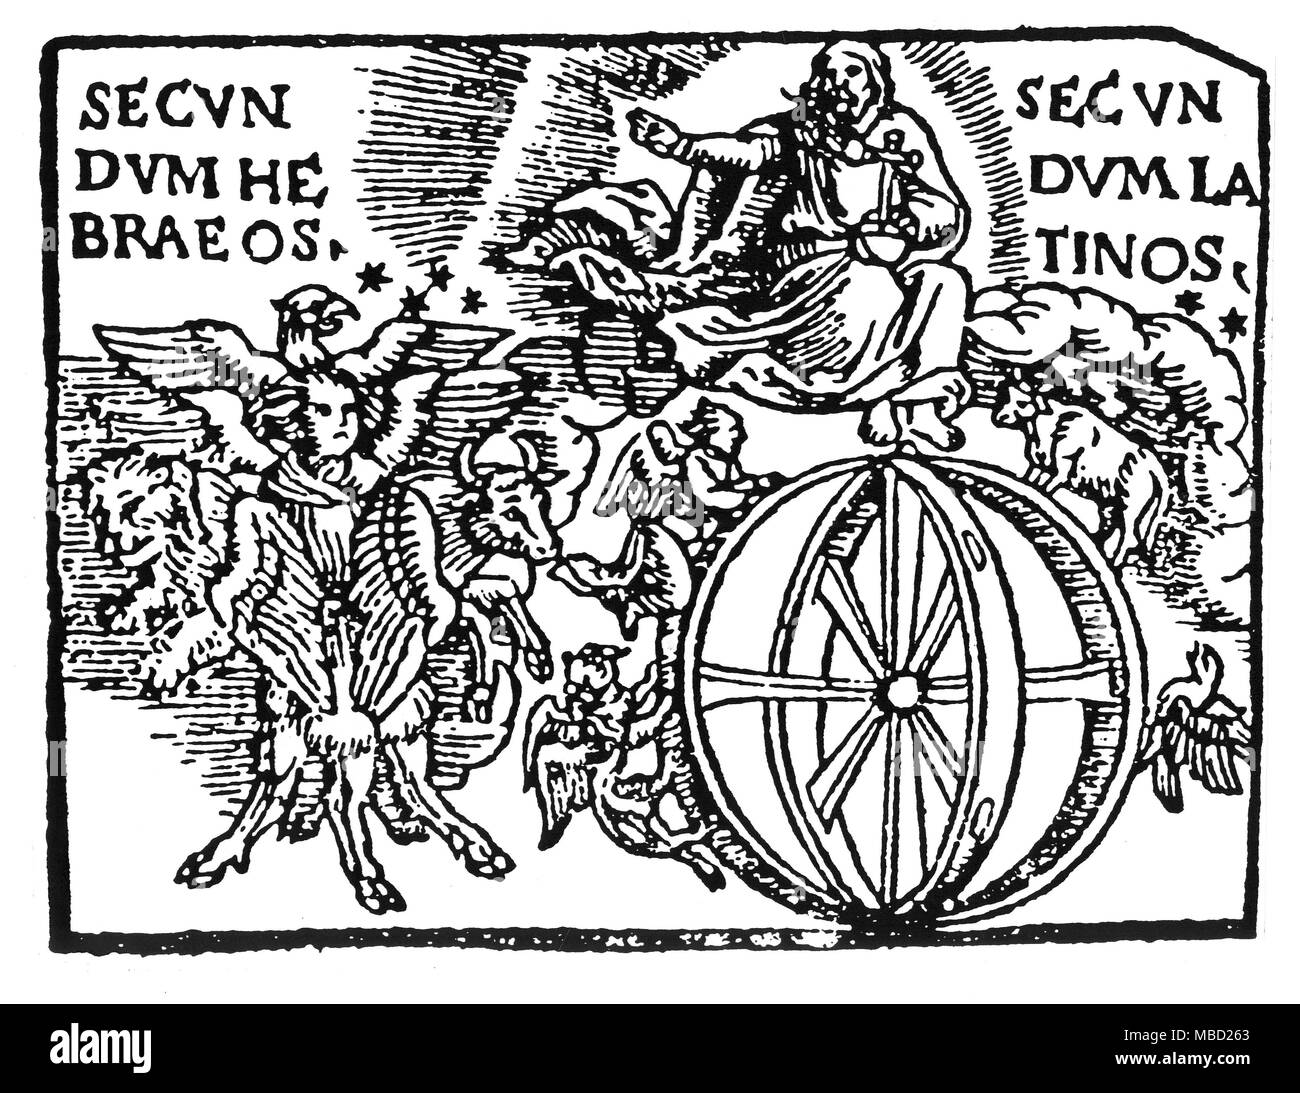 SYMBOLS - UFOS - VISIONS Woodcut depicting the Vision of Ezekiel - the turning wheel, with the four creatures of the Evangelists, has been wrongly claimed as an early description of an Unidentified Flying Object, when it is is (in Biblical reality) a description of the spiritual hierarchies beyond the confines of Time, marked by the sphere of Saturn. To the left of the double wheel is a composite of the creatures of the Four Evangelists, which are also the fixed signs of the zodiac - The Eagle is the creature of John, the Lion is the animal of Mark, the Bull is the animal of Luke, while the Stock Photo